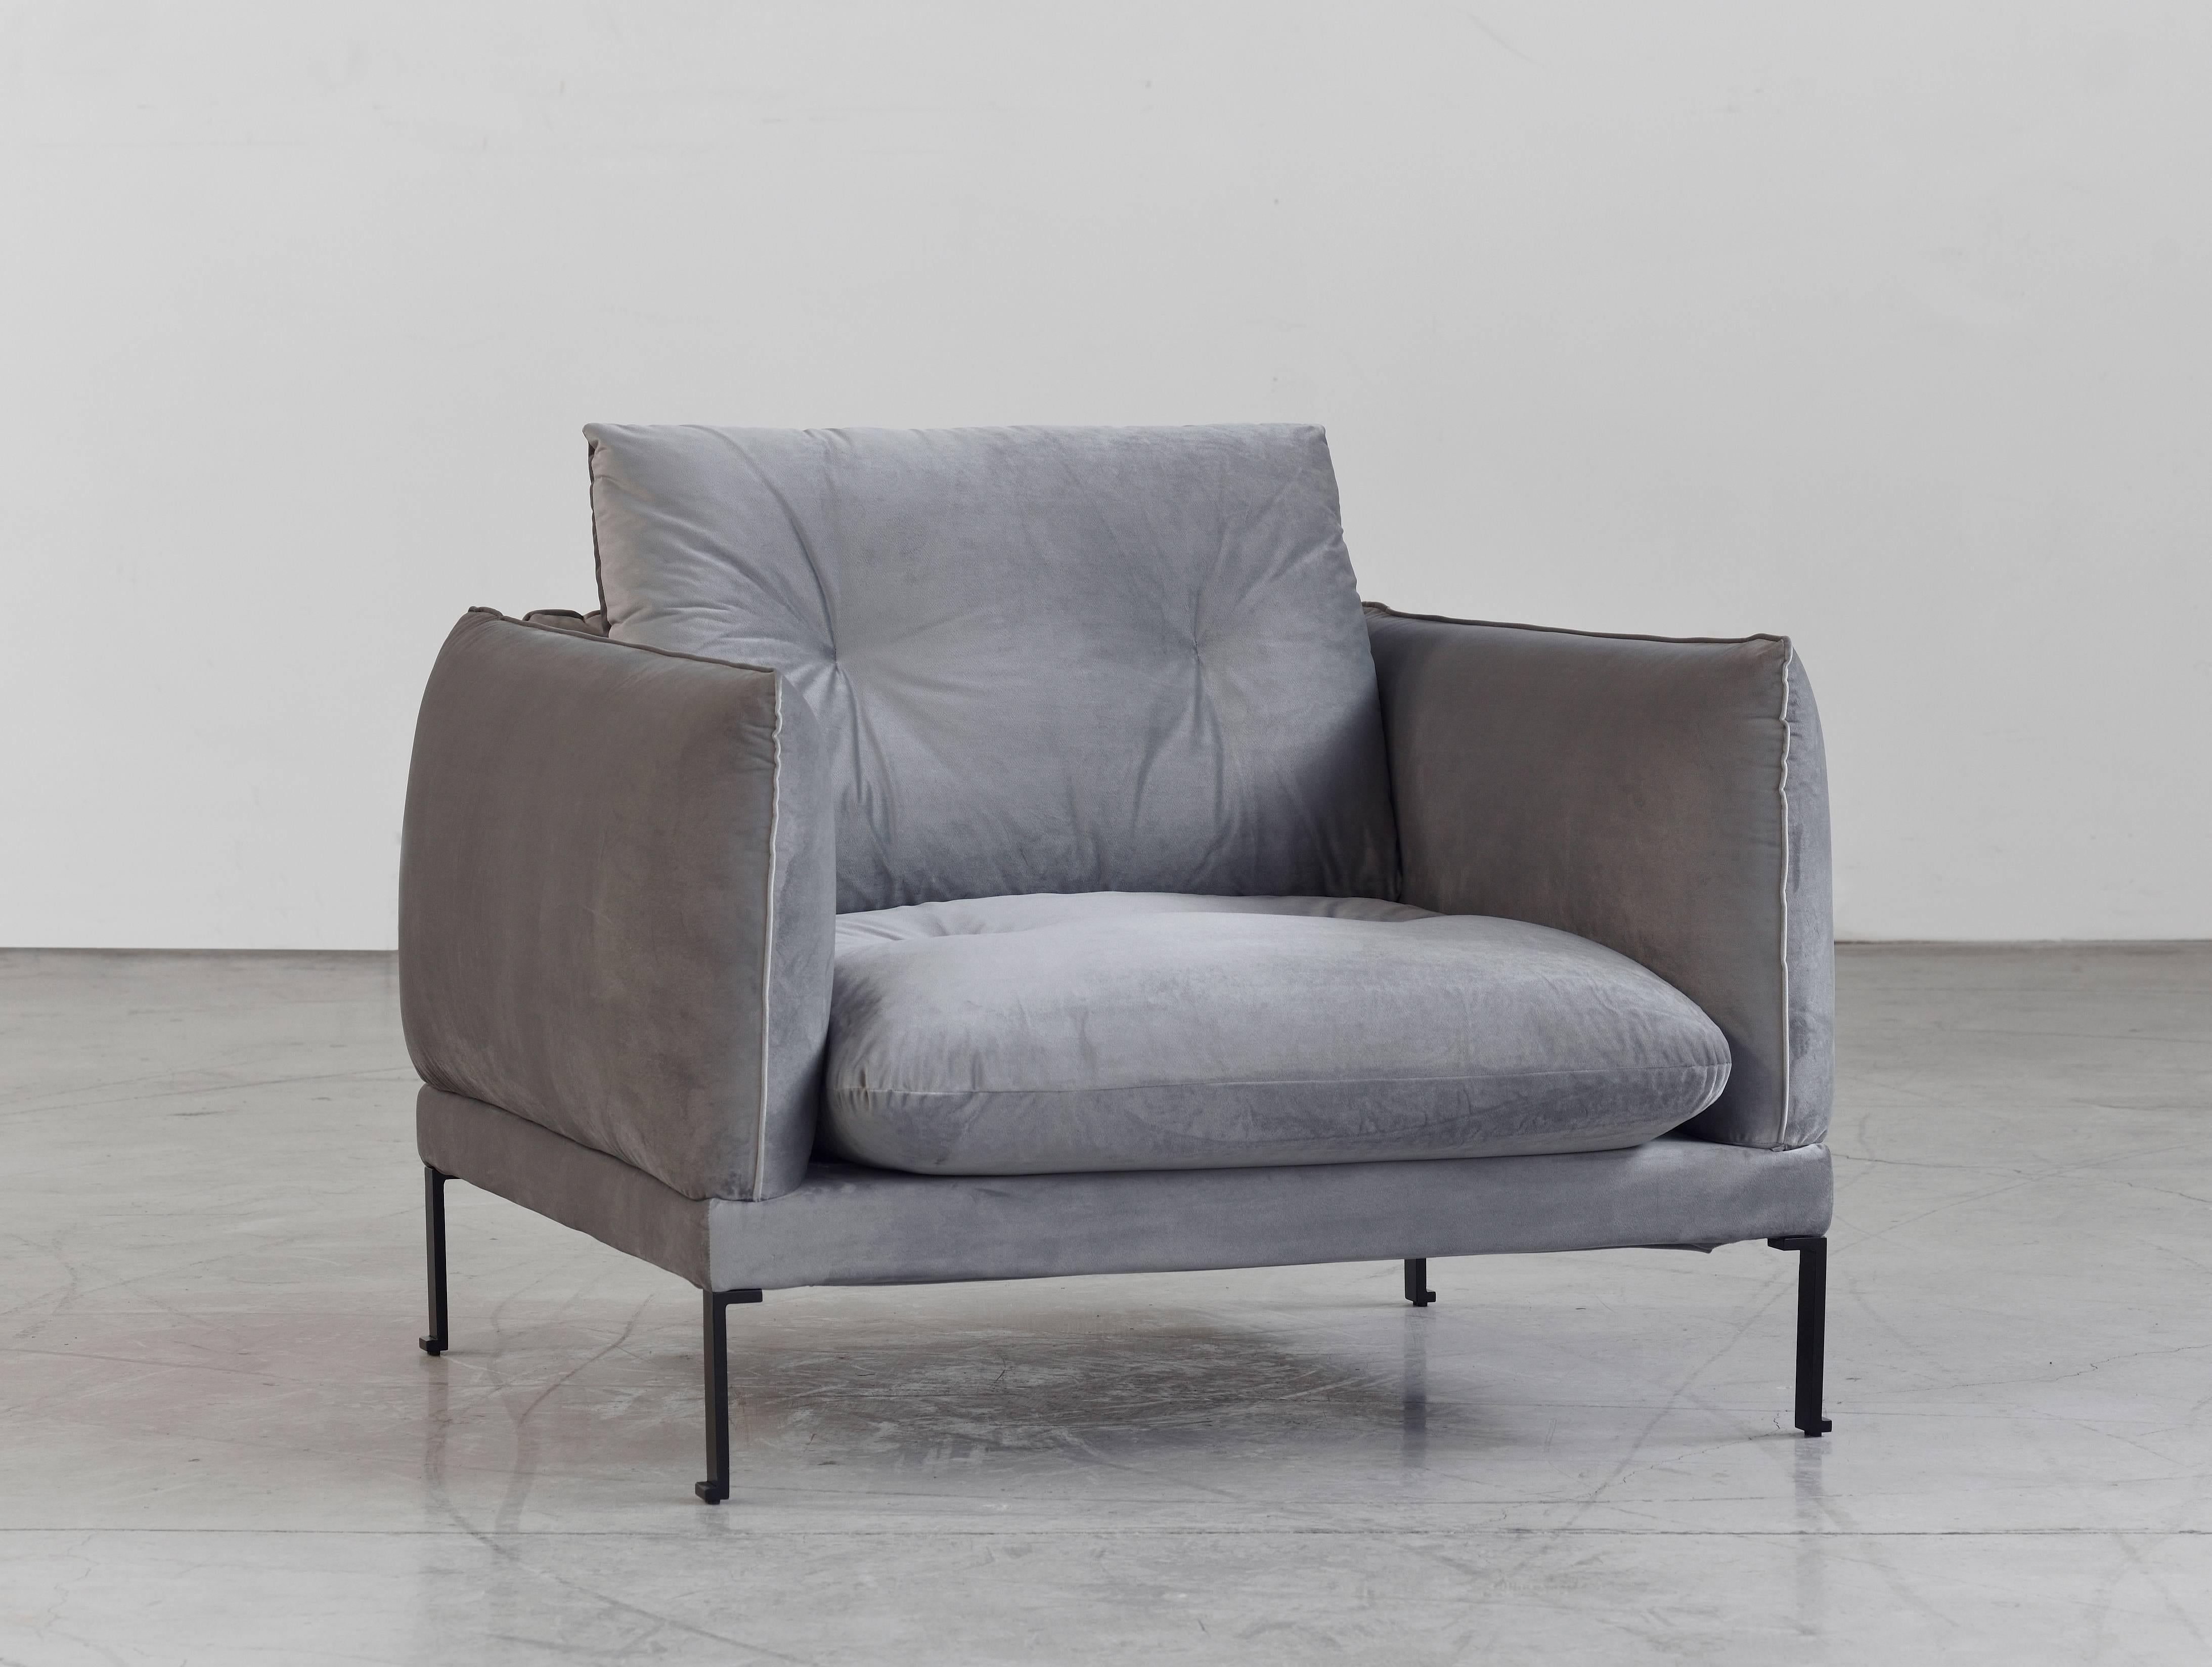 Santorini is an inviting armchair with flowing lines and rounded edges, inspired by the curvilinear architectural forms found at the Cycladic Santorini Island, in Greece. It's a piece of modern clean silhouette, which provides maximum softness and